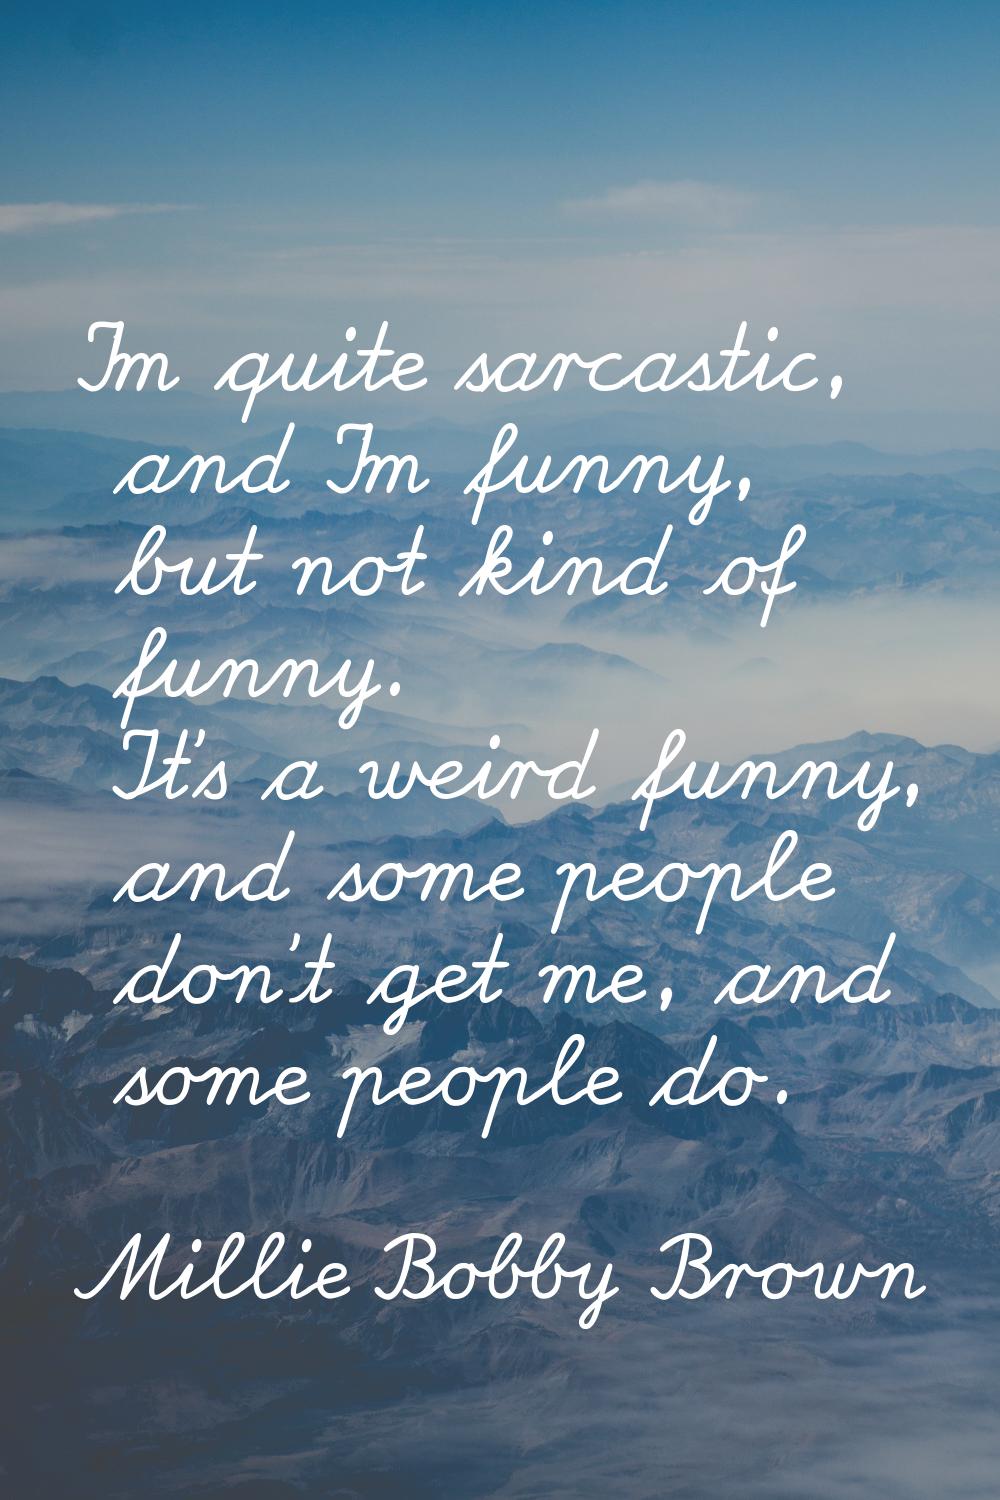 I'm quite sarcastic, and I'm funny, but not kind of funny. It's a weird funny, and some people don'